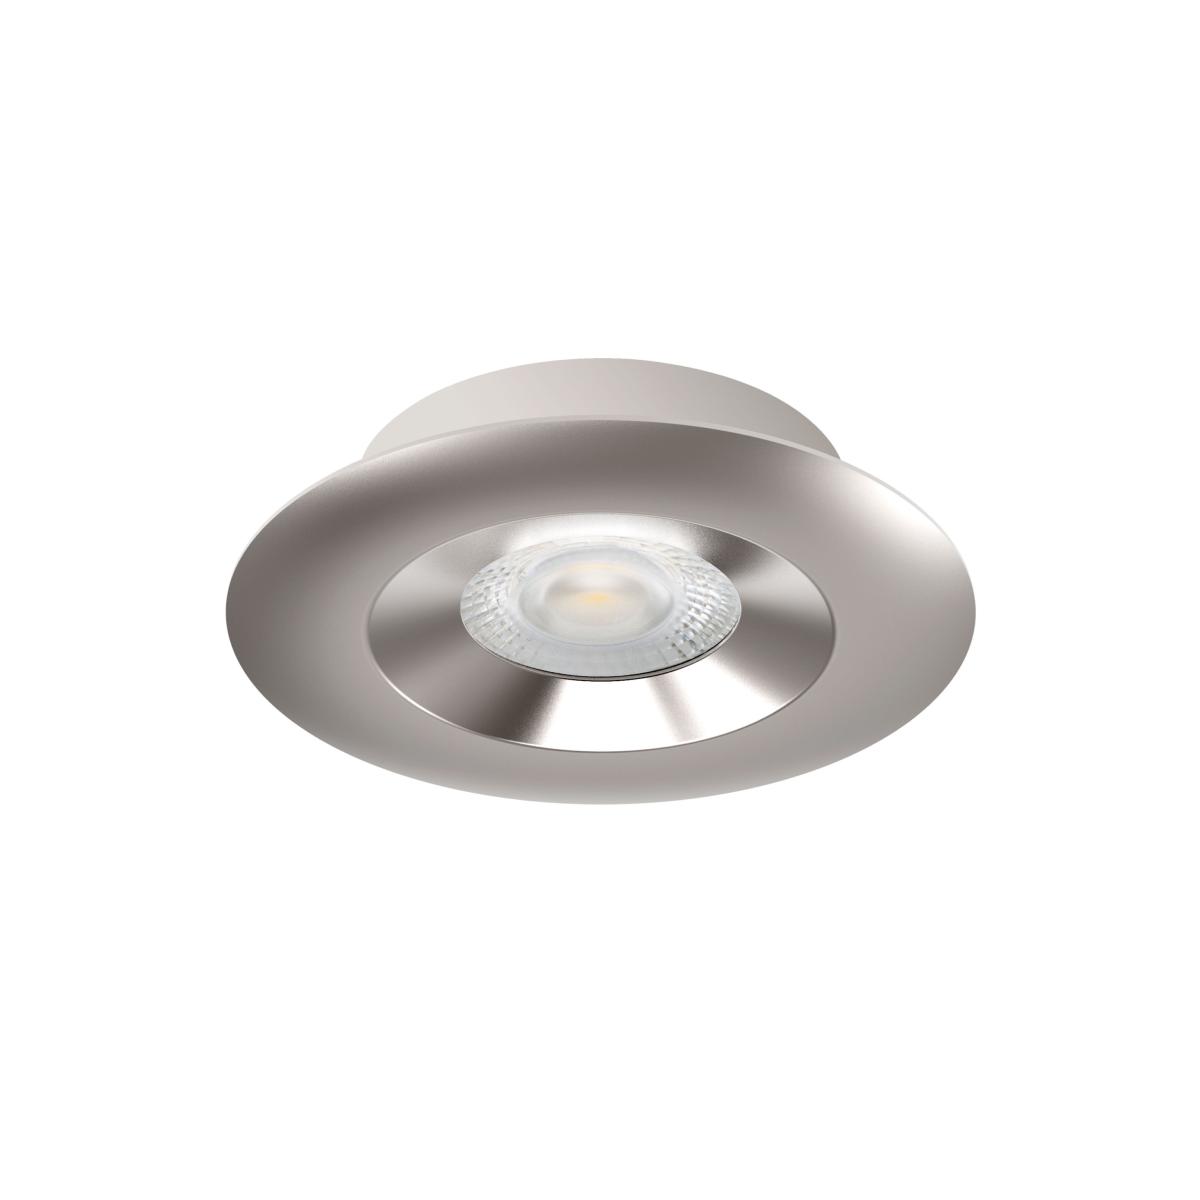 Spot LED extra-plat dimmable recouvrable isolant ARIC 5W 36